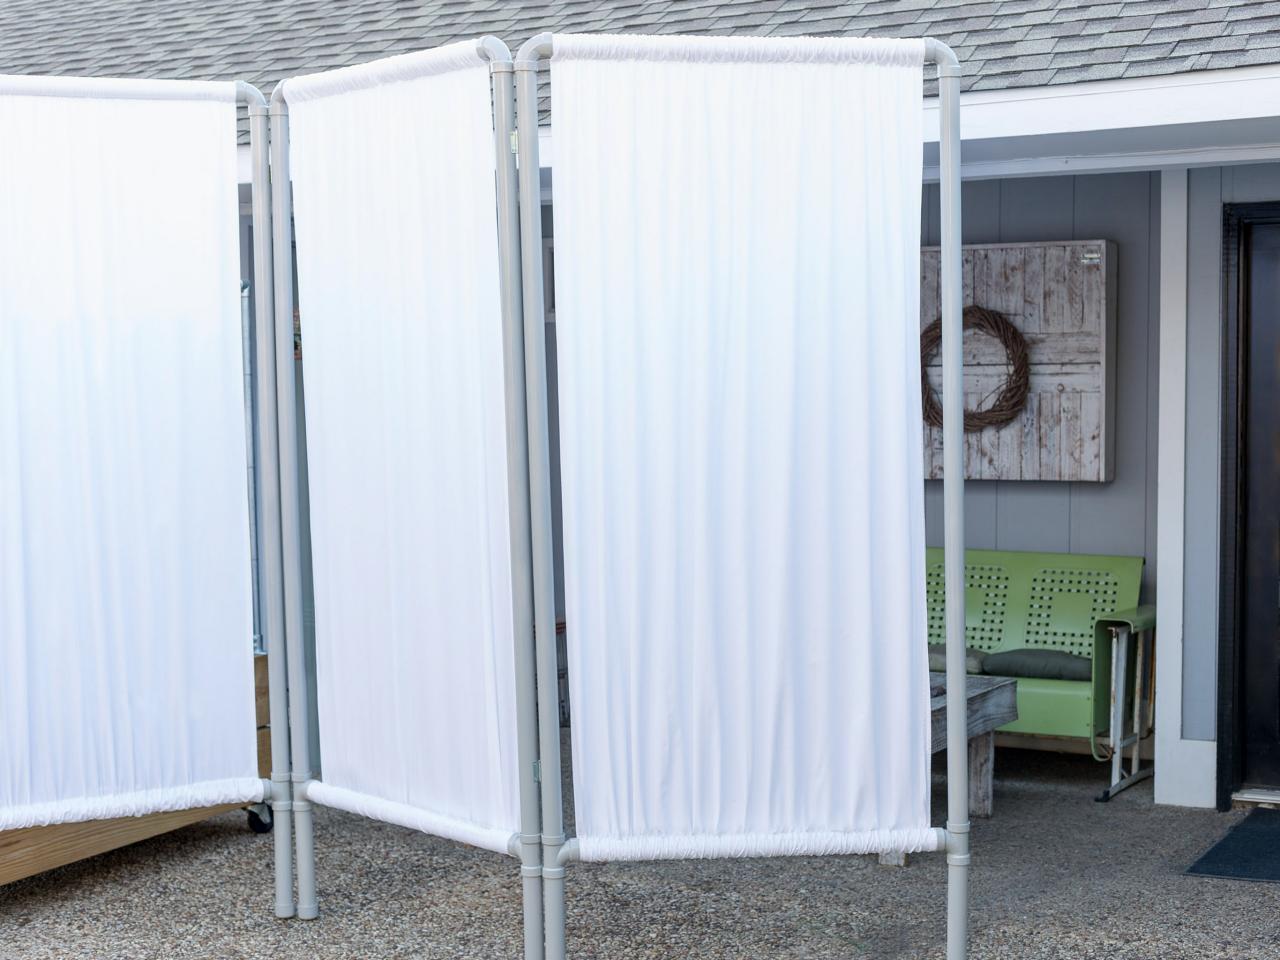 Outdoor Privacy Screen From Pvc Pipe, How To Make A Outdoor Privacy Screen